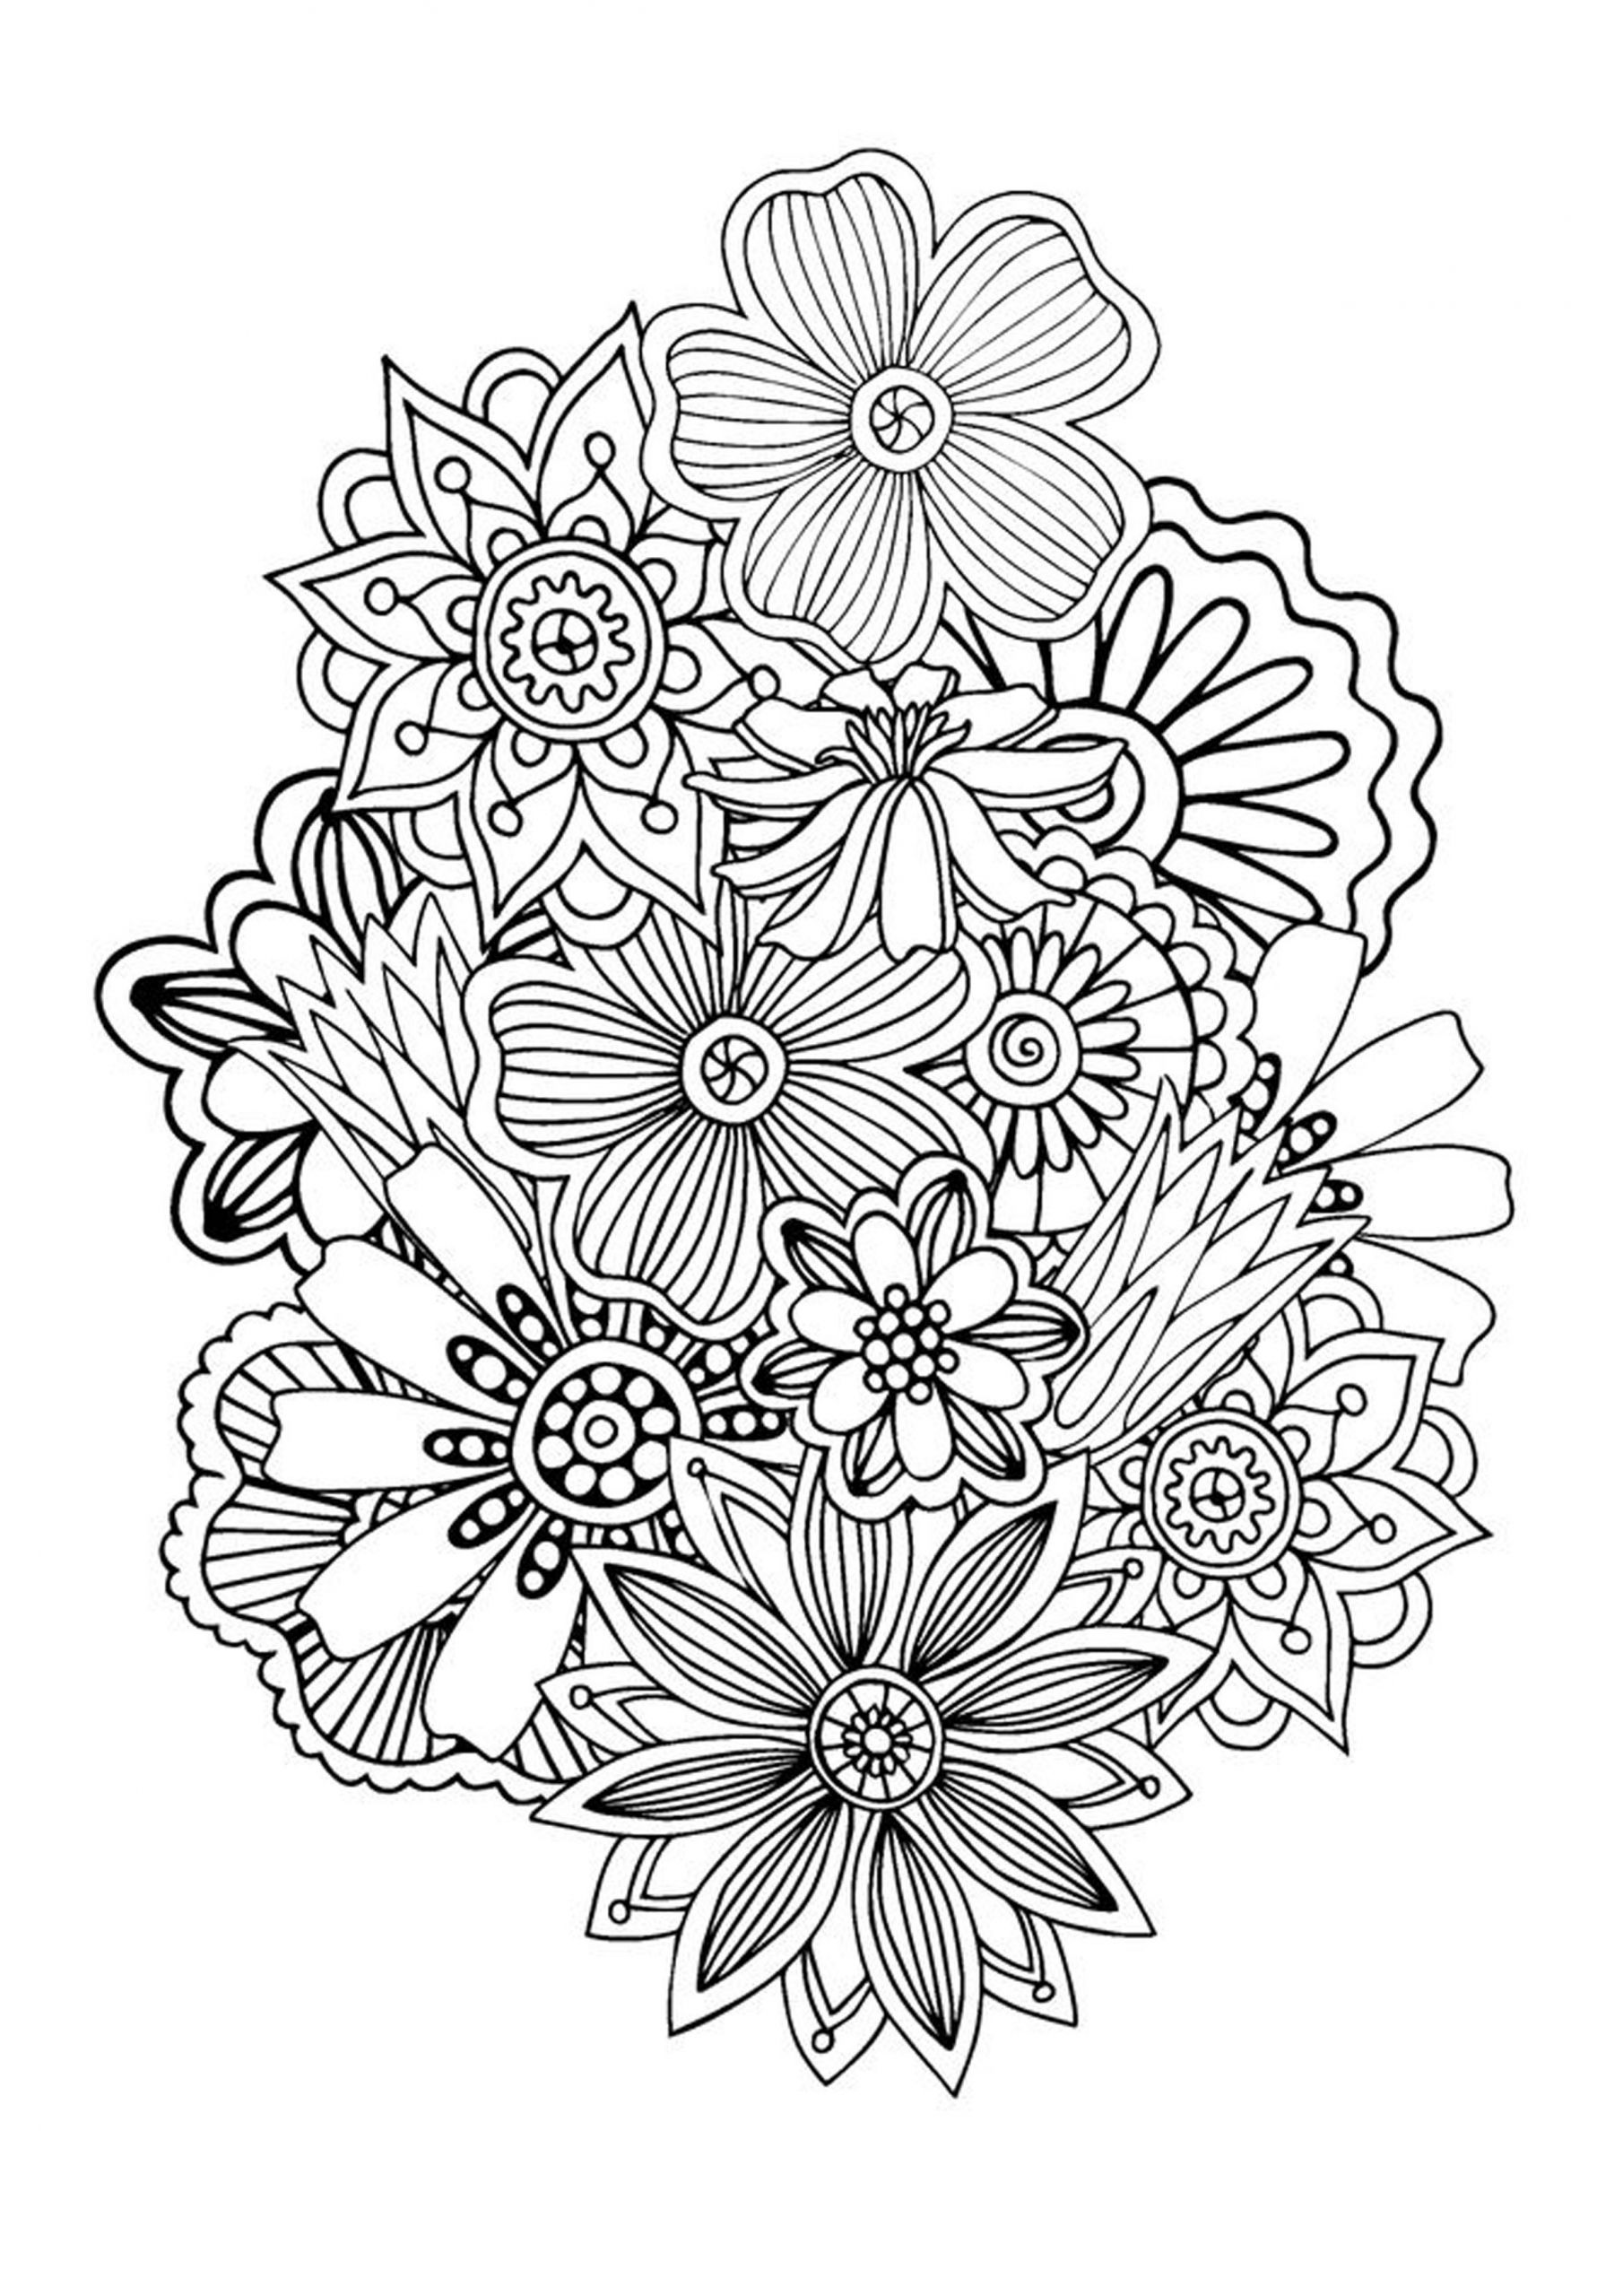 Adult Coloring Pages Patterns Flowers
 Zen antistress abstract pattern inspired Anti stress